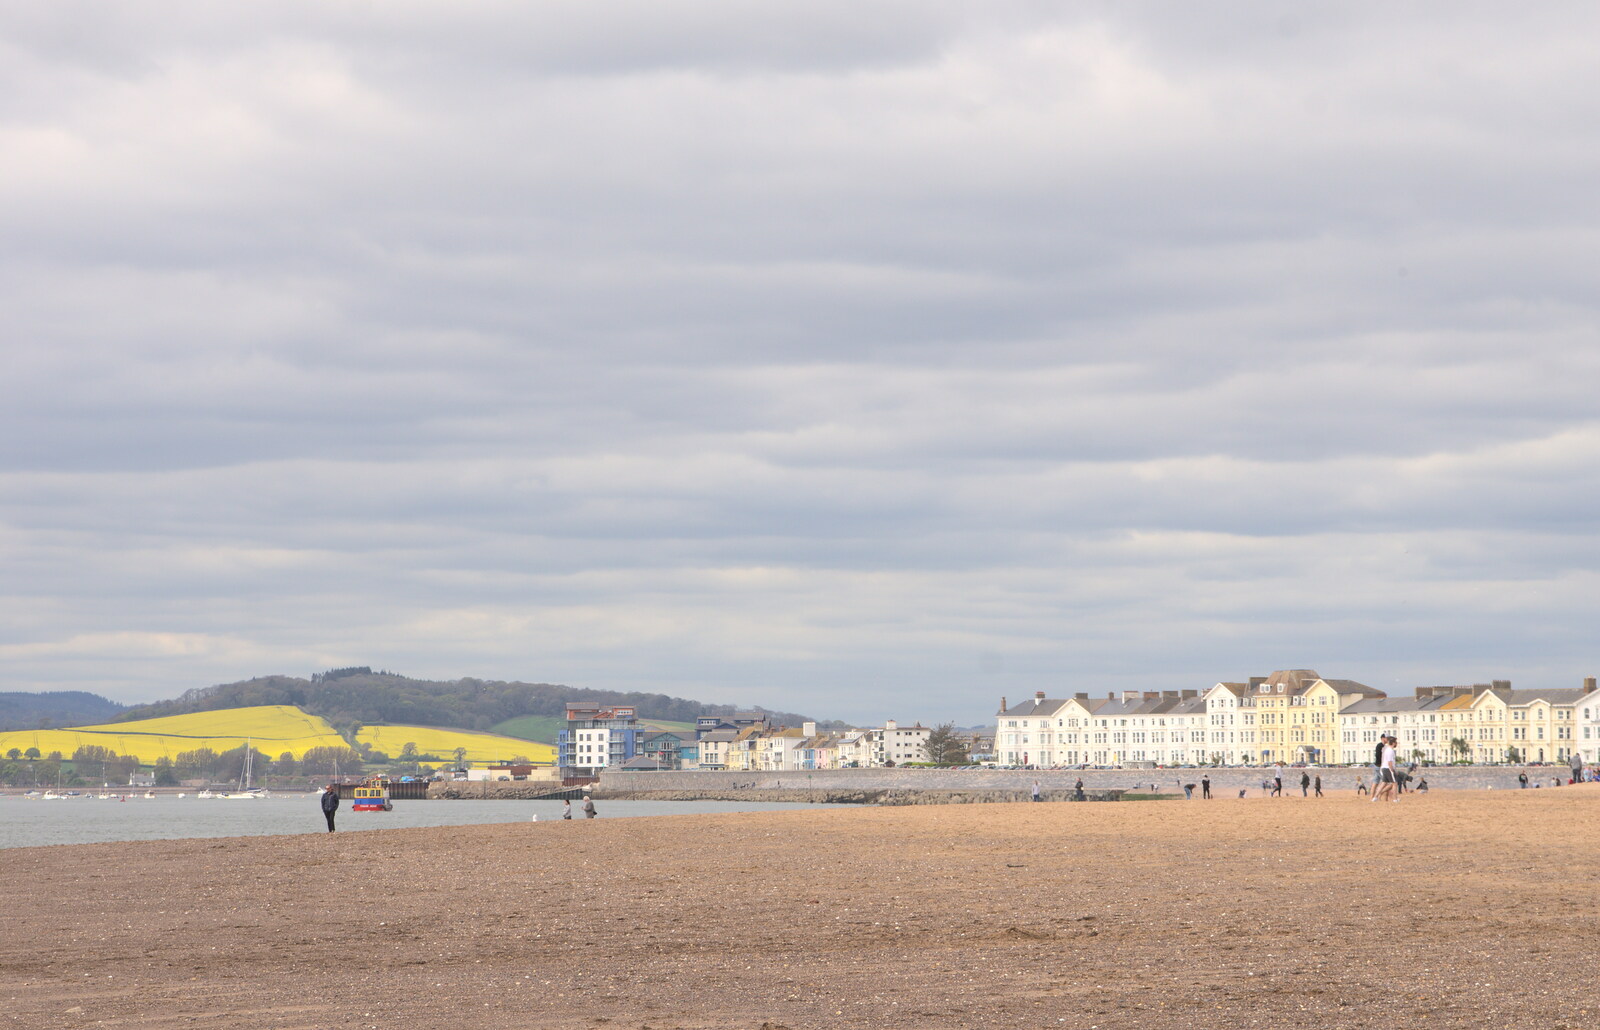 The town of Exmouth from Grandma J's and a Day on the Beach, Spreyton and Exmouth, Devon - 13th April 2017